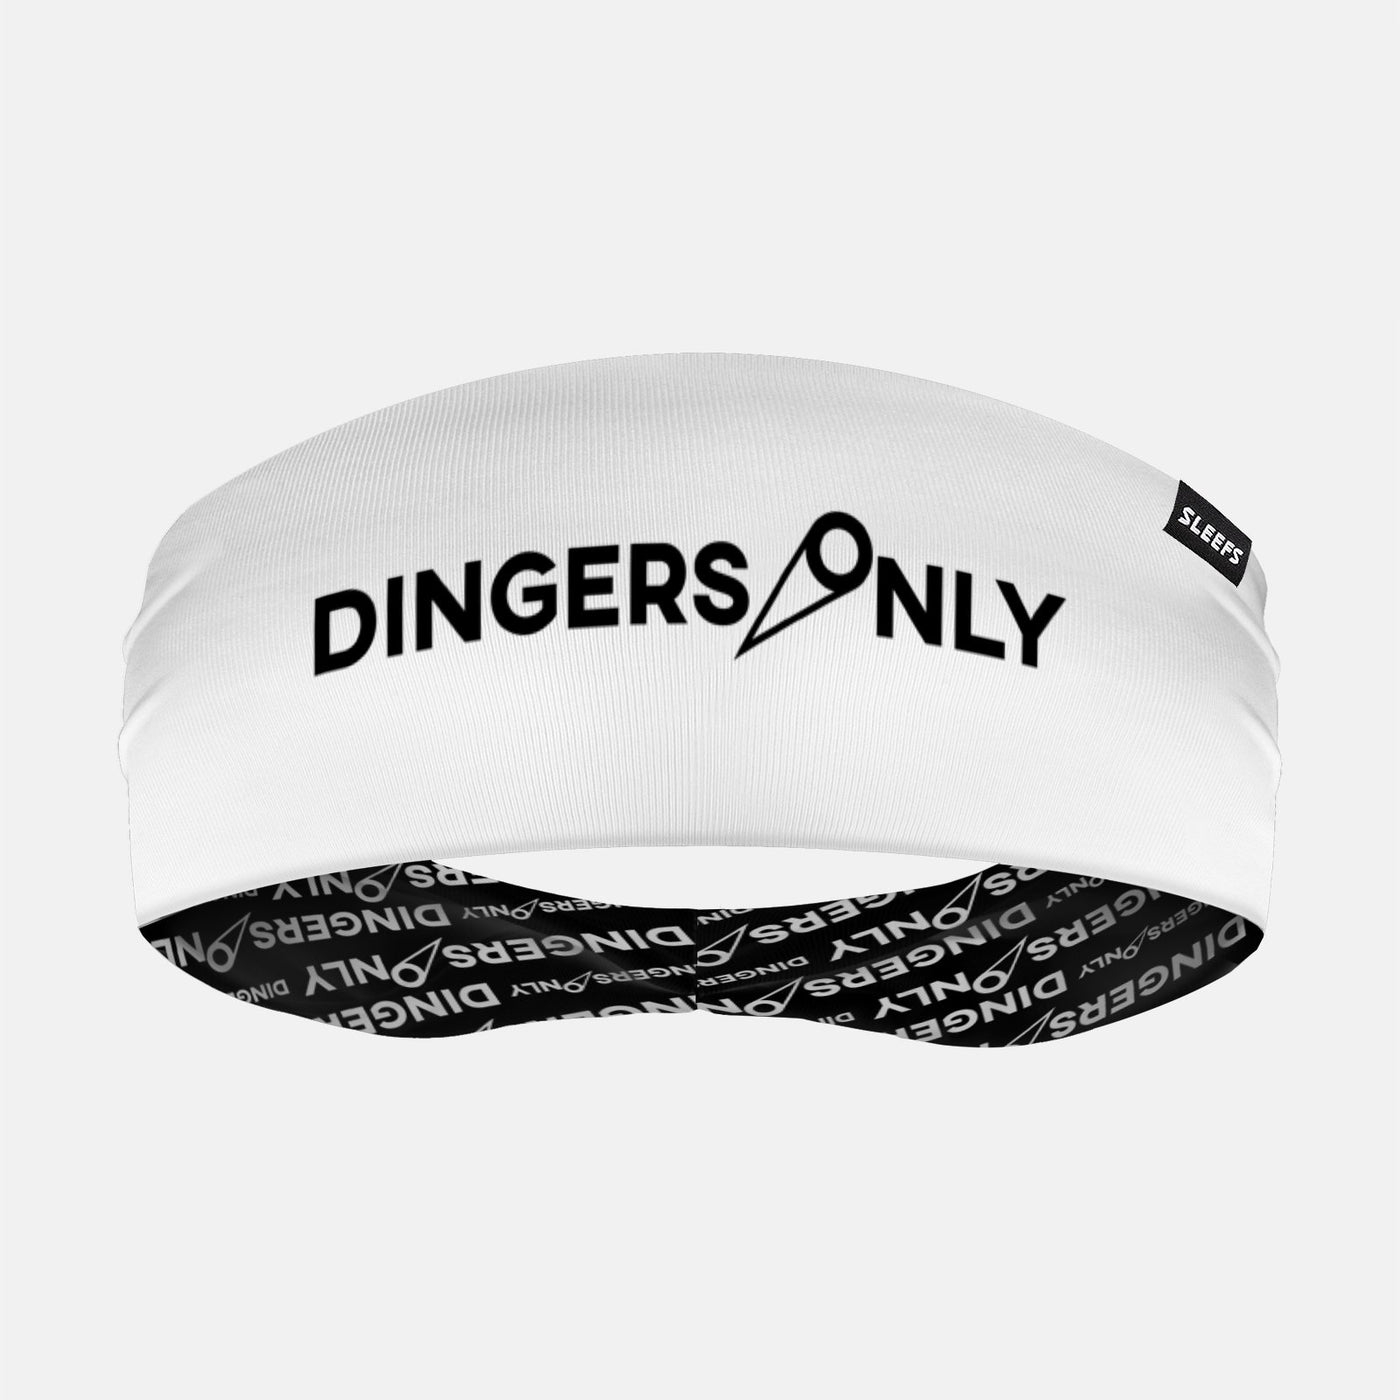 Dingers Only Headband